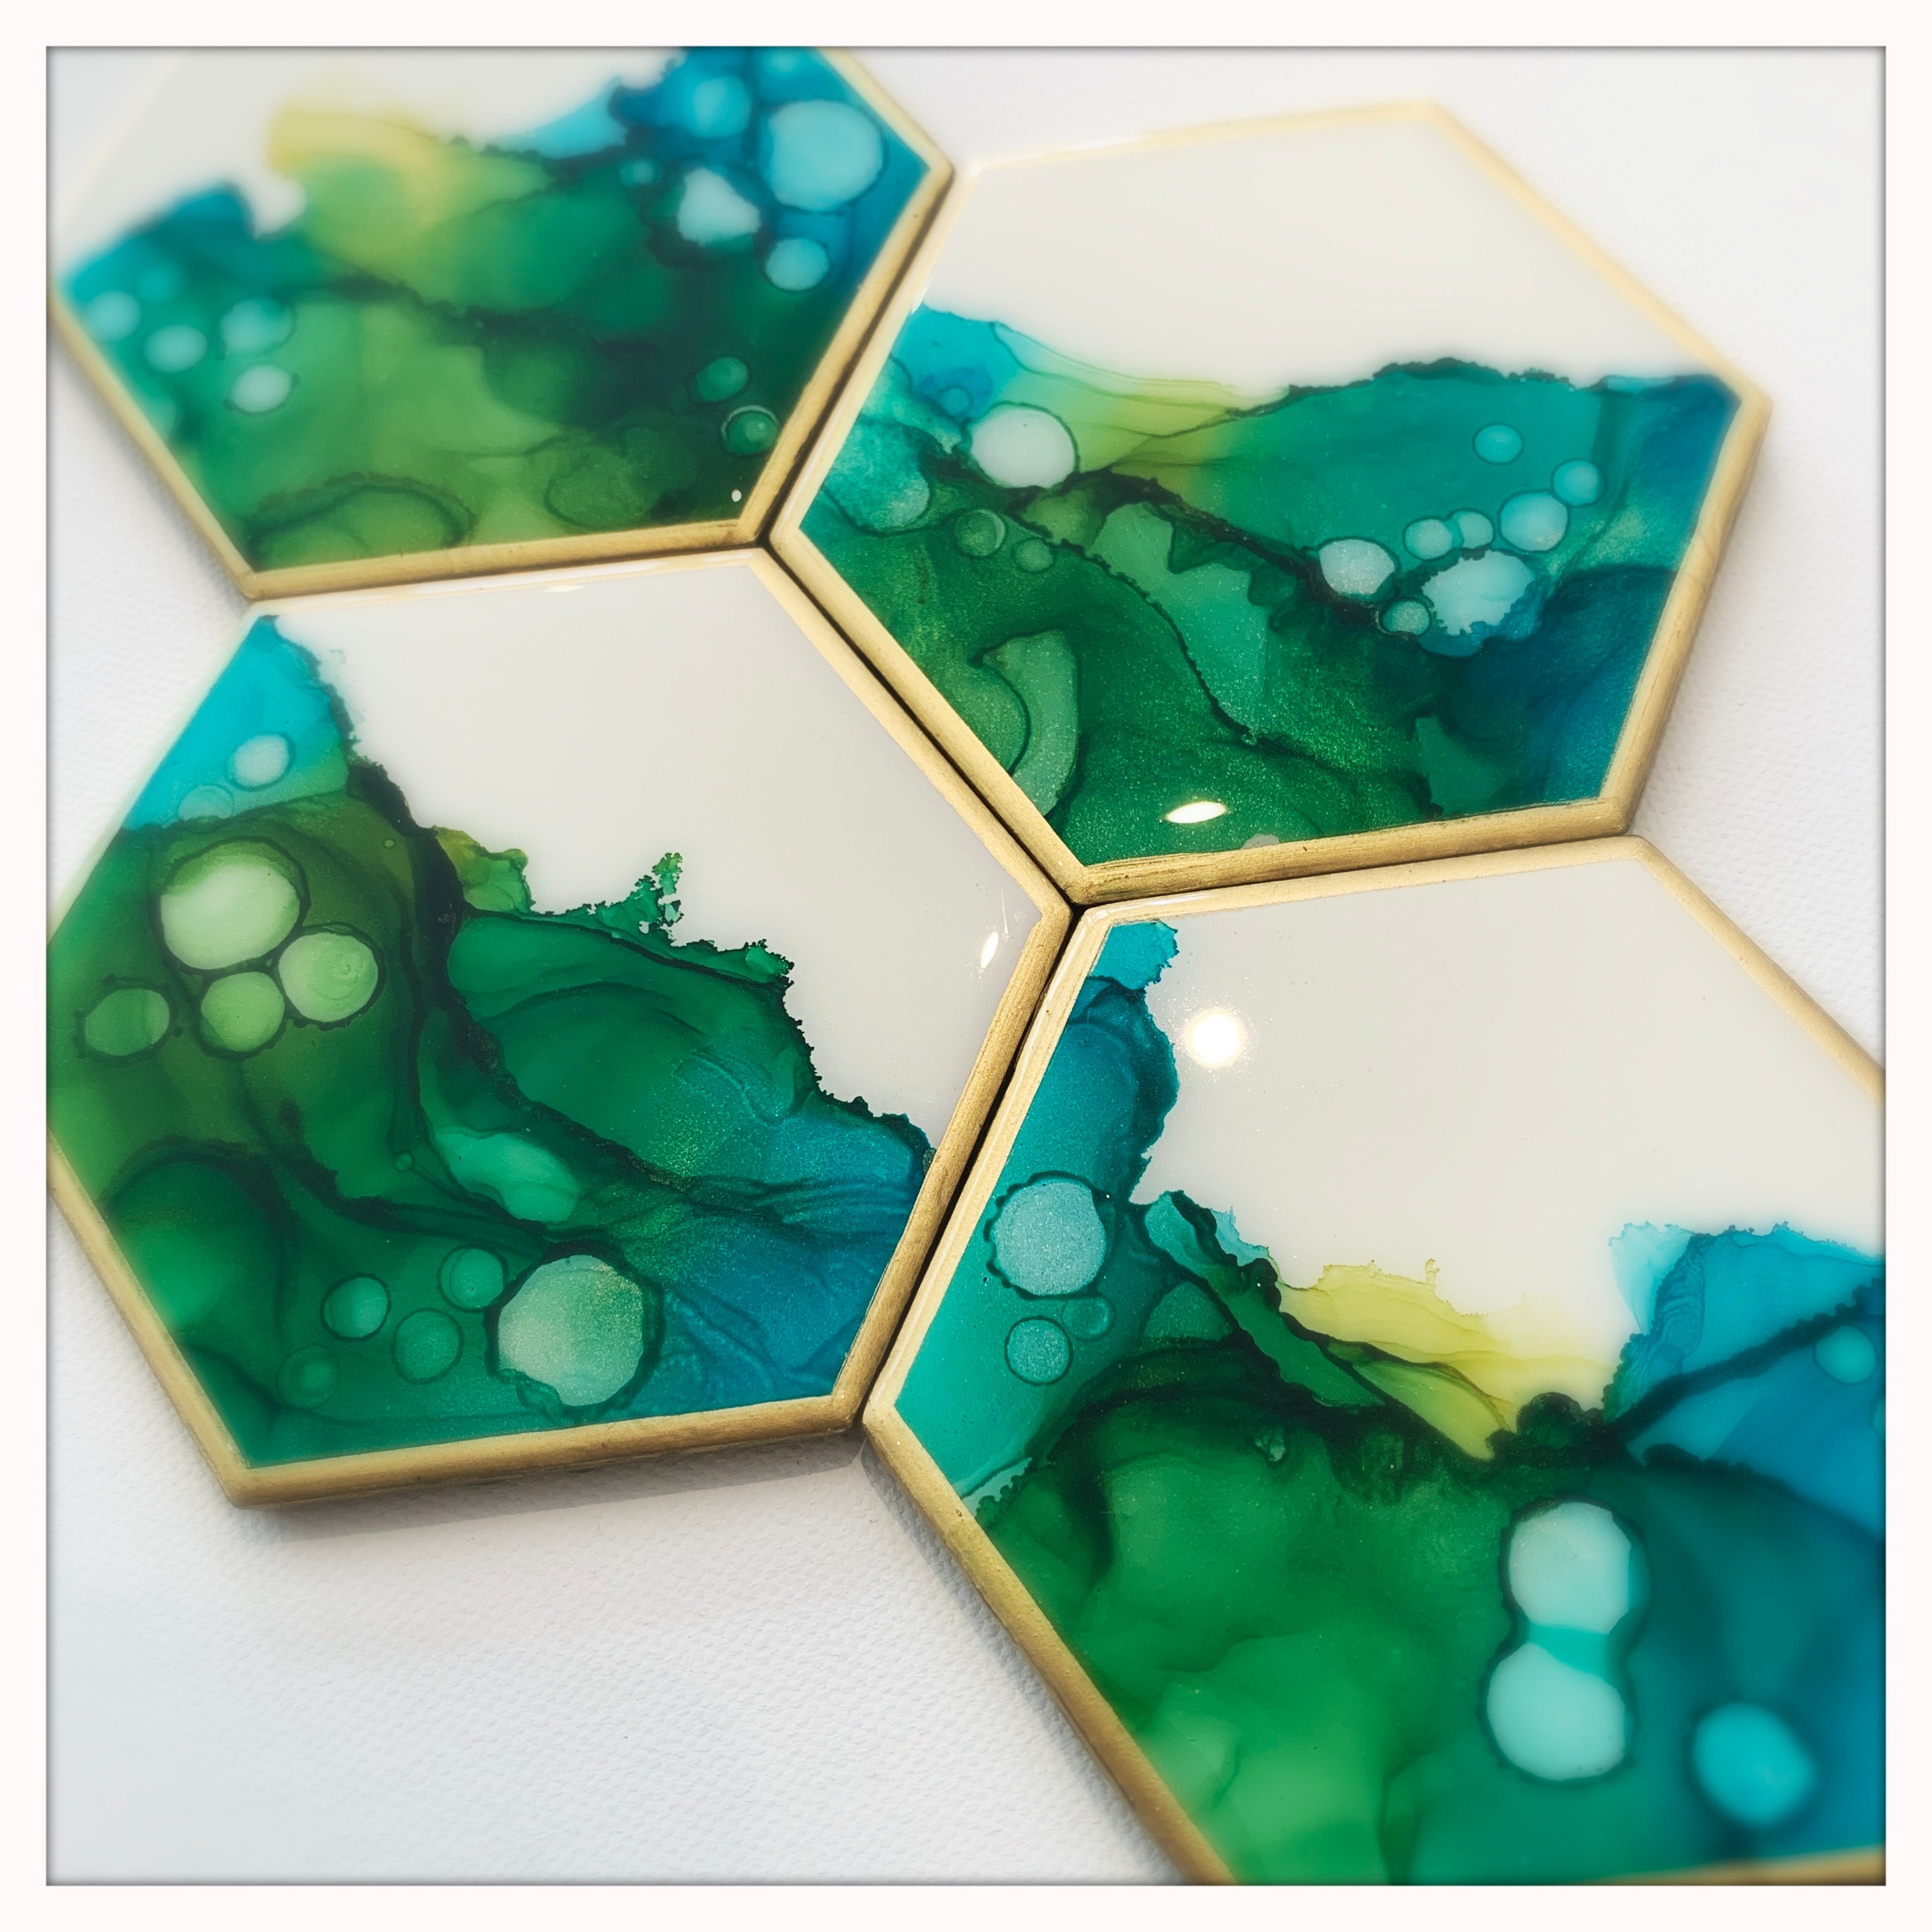 Coasters Set of 4 - Green + Teal